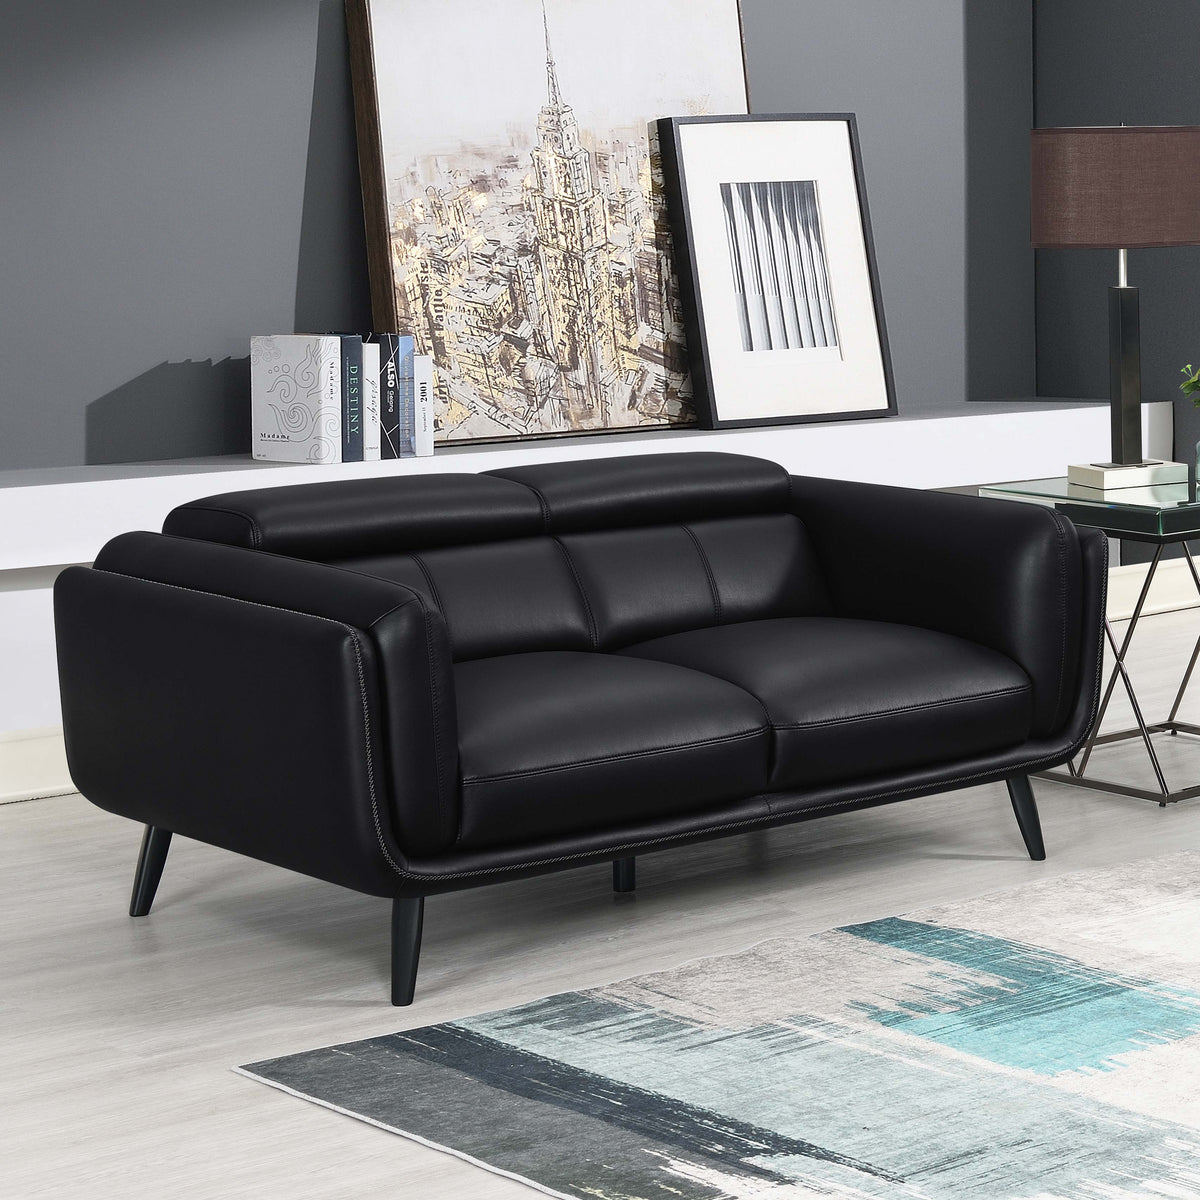 Shania Track Arms Loveseat with Tapered Legs Black Shania Track Arms Loveseat with Tapered Legs Black Half Price Furniture